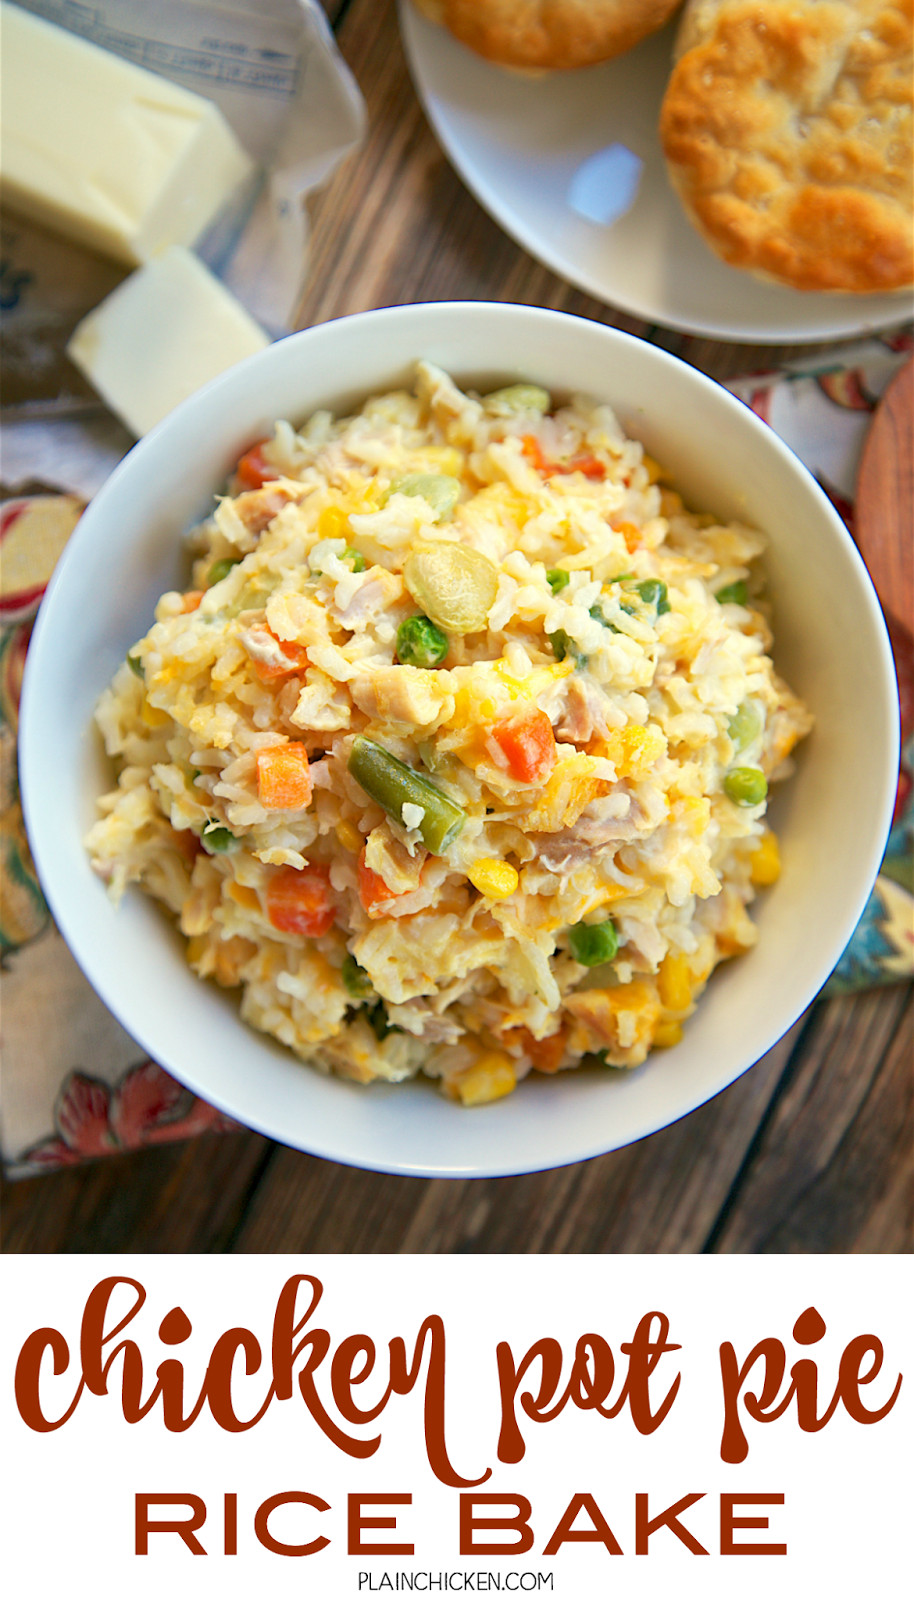 Vegetable Side Dishes For Chicken
 Chicken Pot Pie Rice Bake